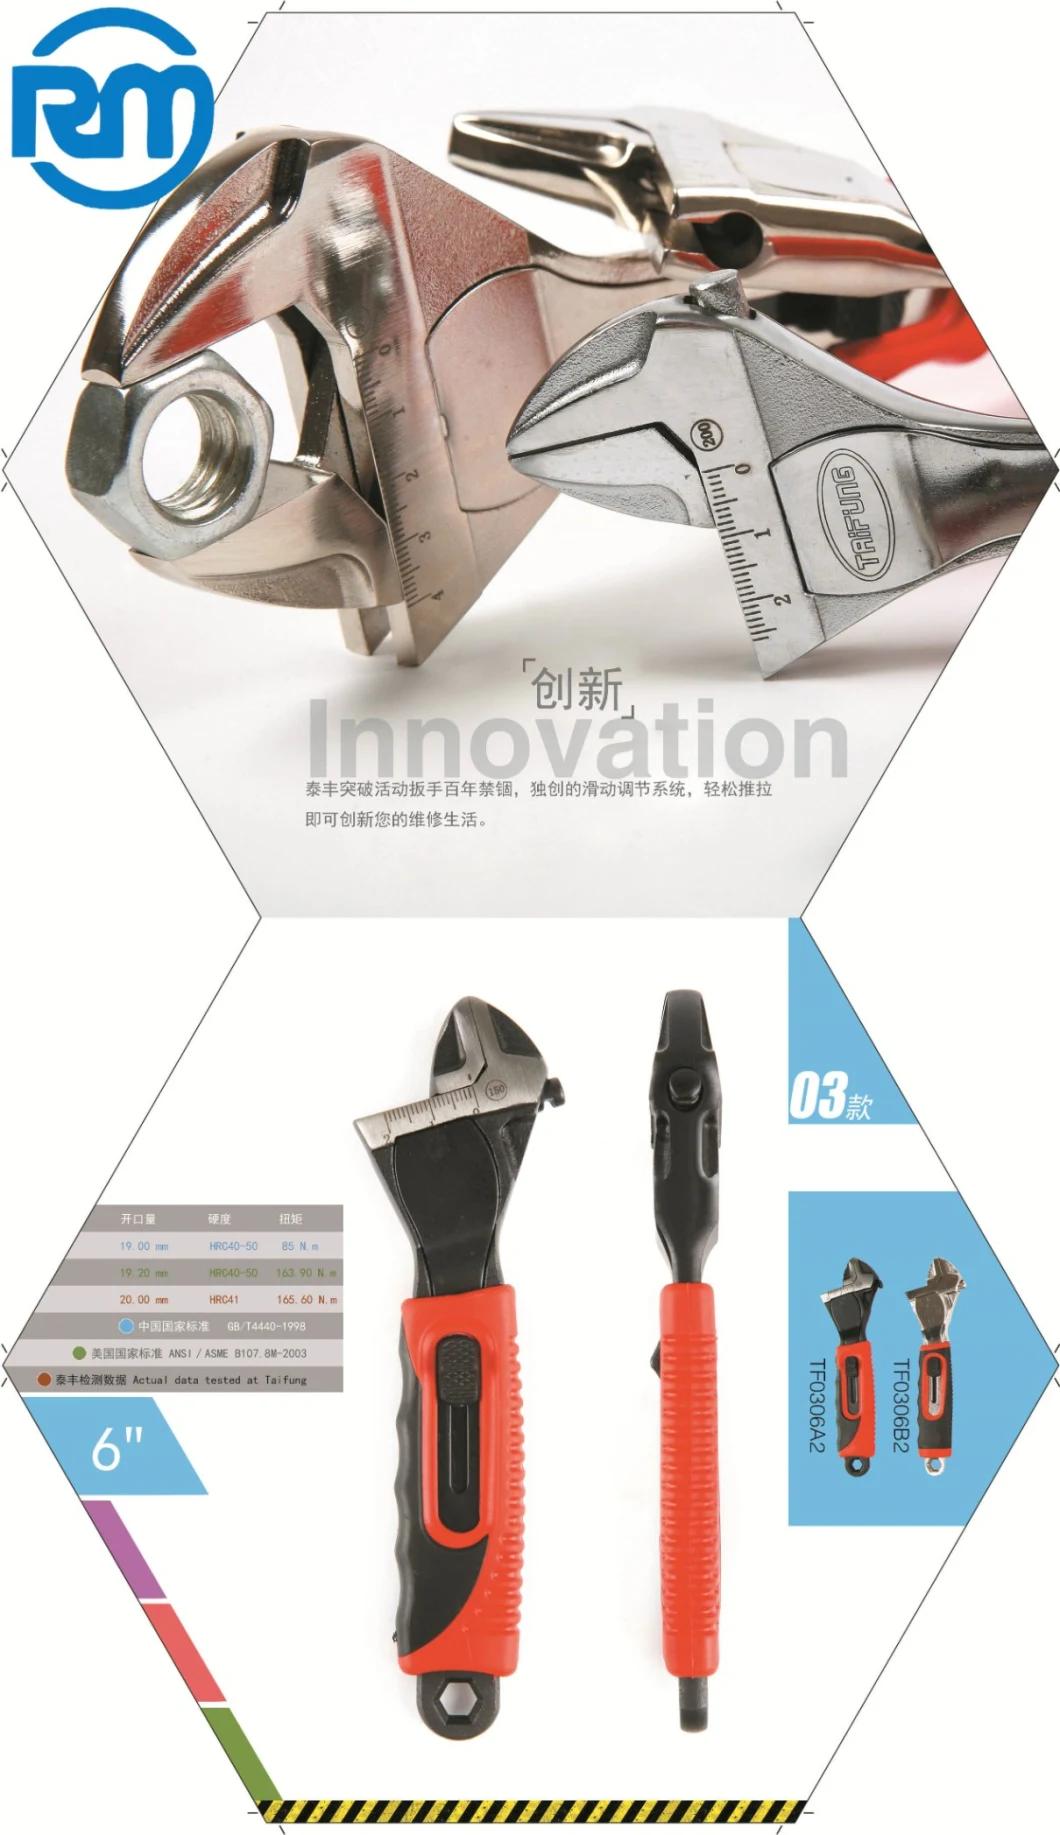 Innovation Sliding Adjustment Innovation Easily Push and Pull American ASME Standards Strictly Controlled